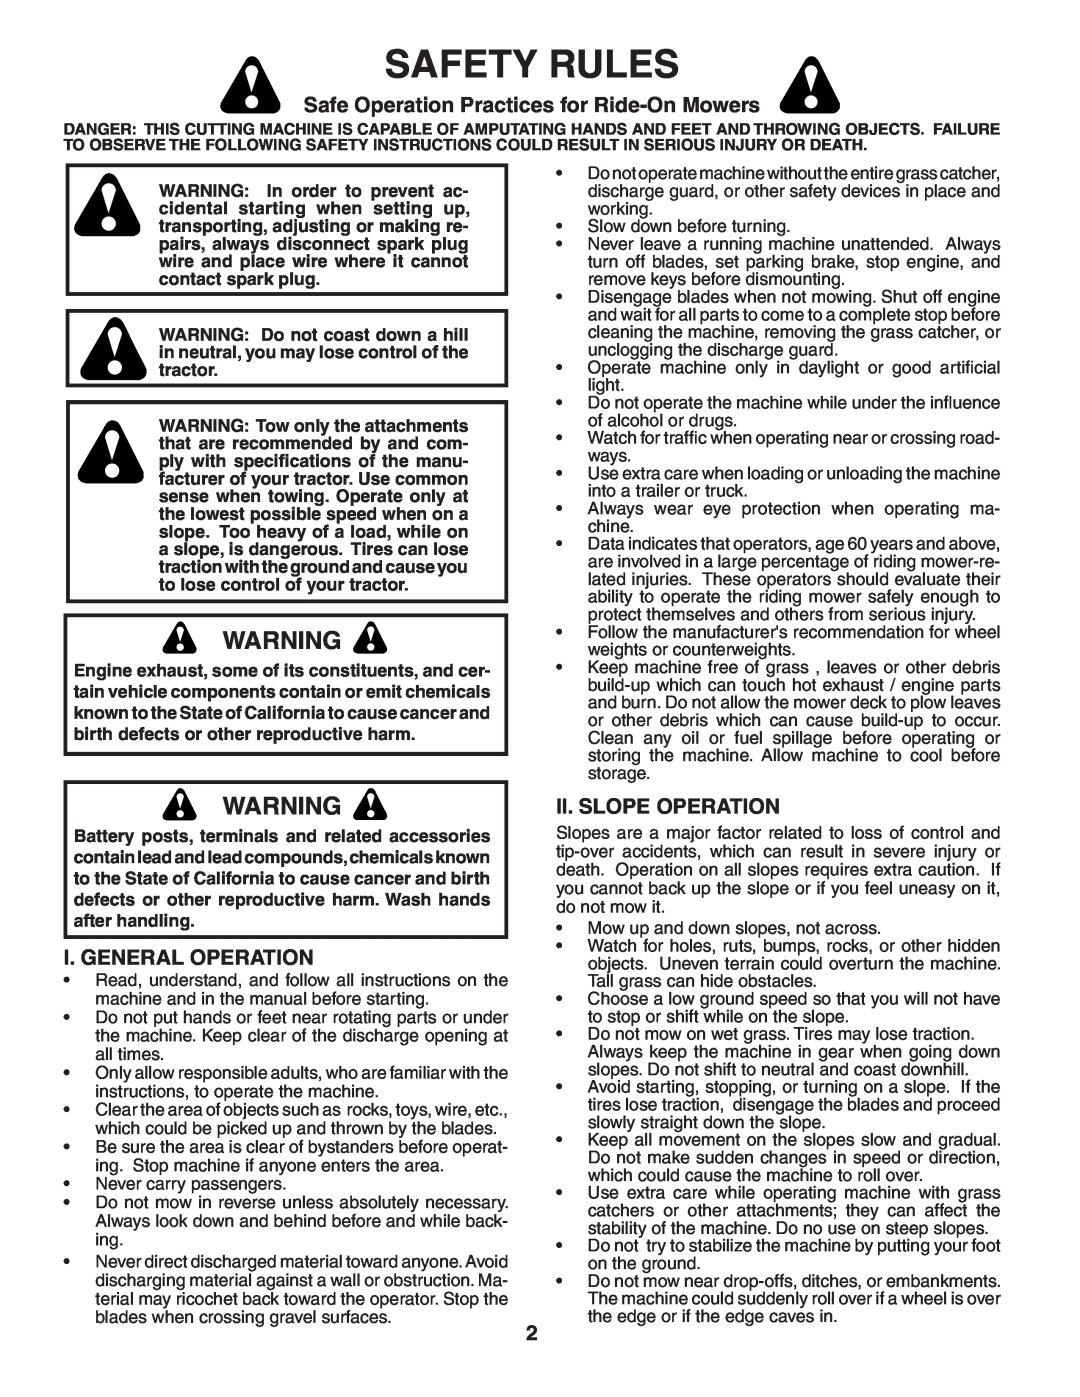 Poulan 404402 manual Safety Rules, Safe Operation Practices for Ride-OnMowers, I. General Operation, Ii. Slope Operation 